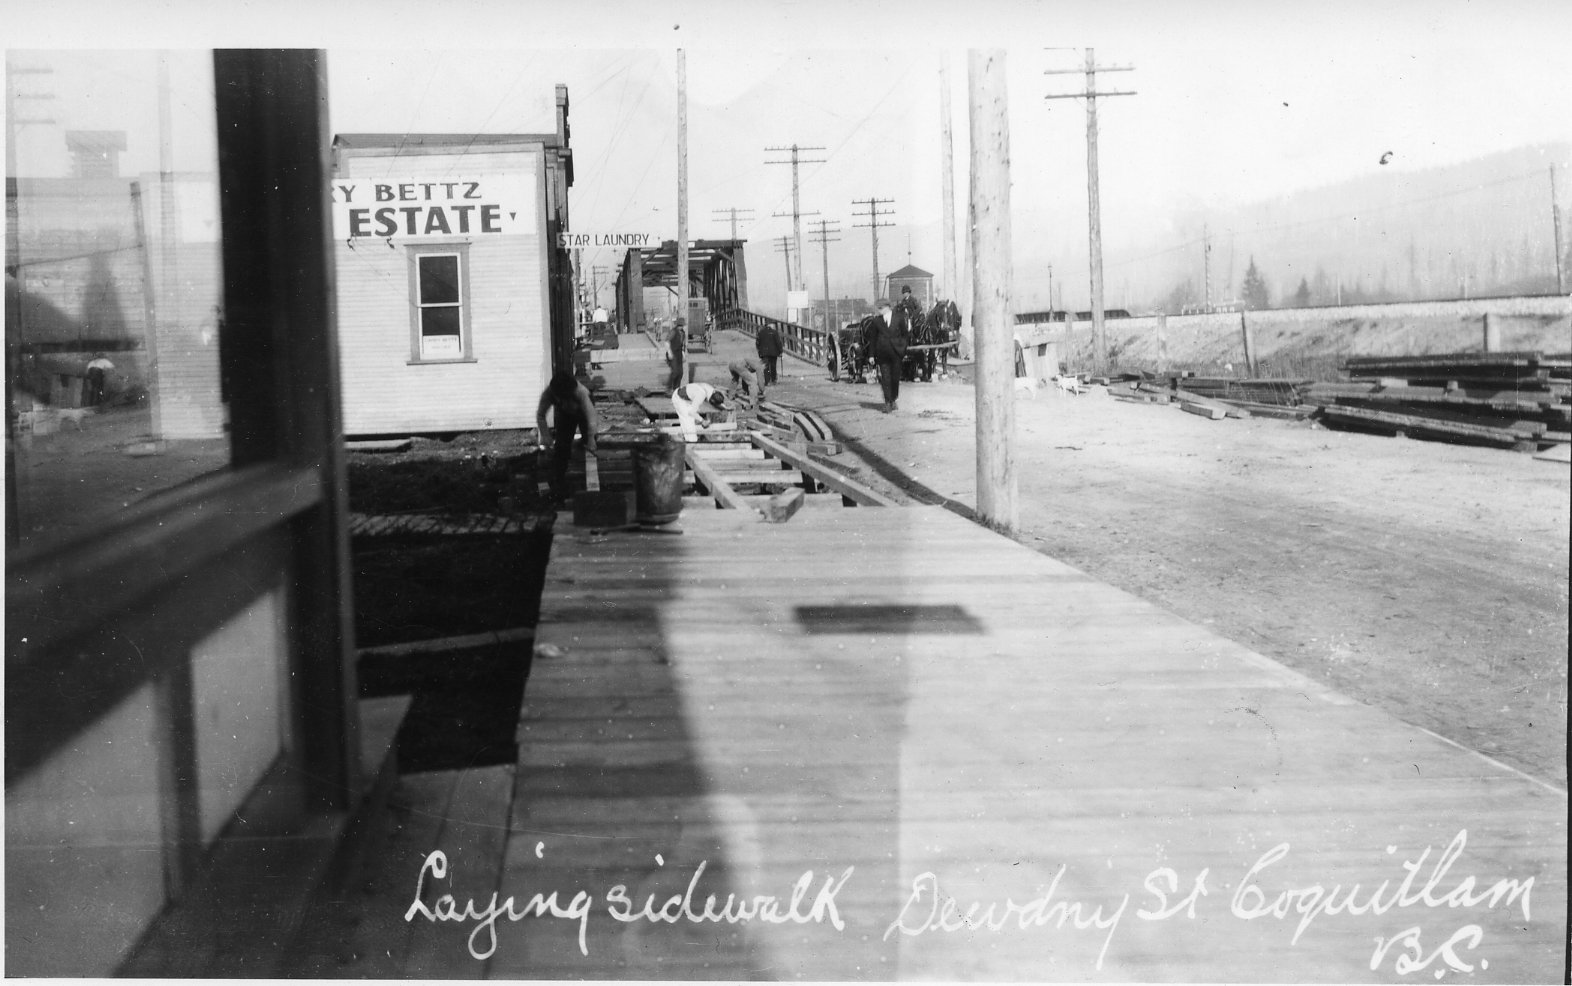 A black and white photo of a wooden sidewalk and dirt road with store fronts on the left and bridge in the distance